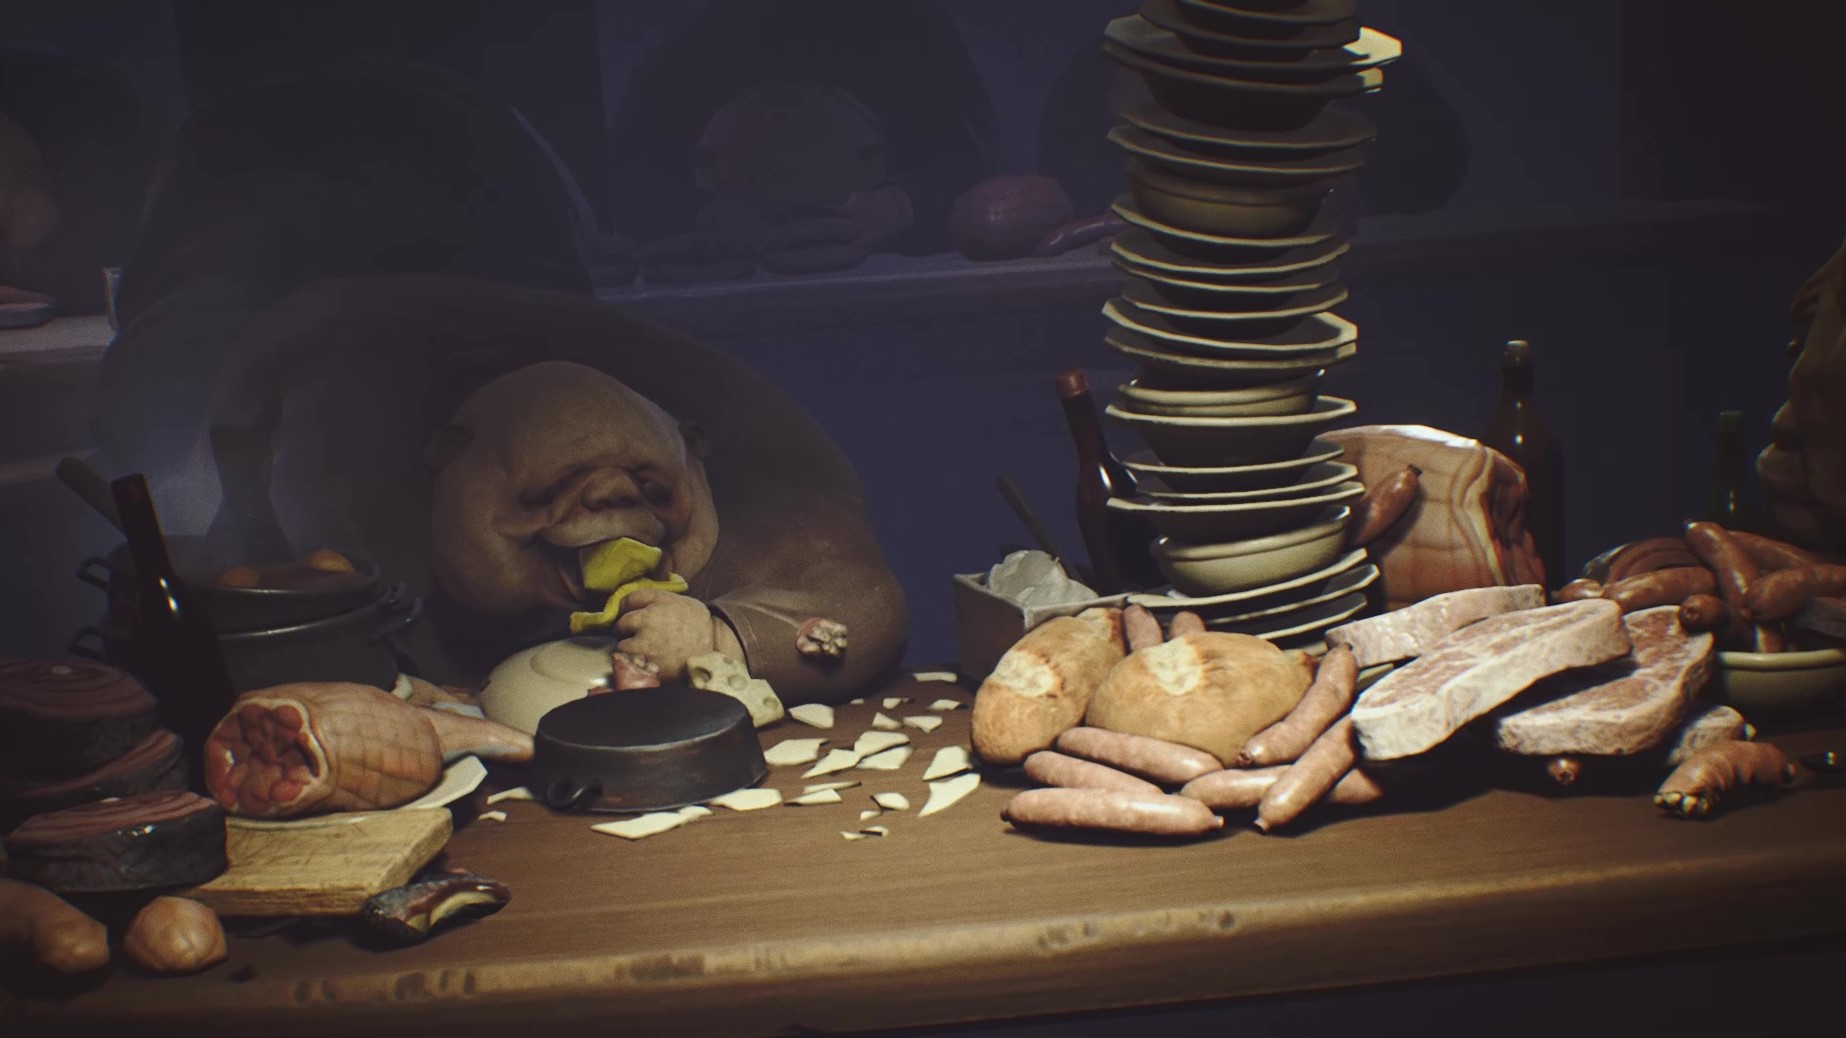 Great Moments In Pc Gaming Escaping Little Nightmares Meat Feast Pc Gamer